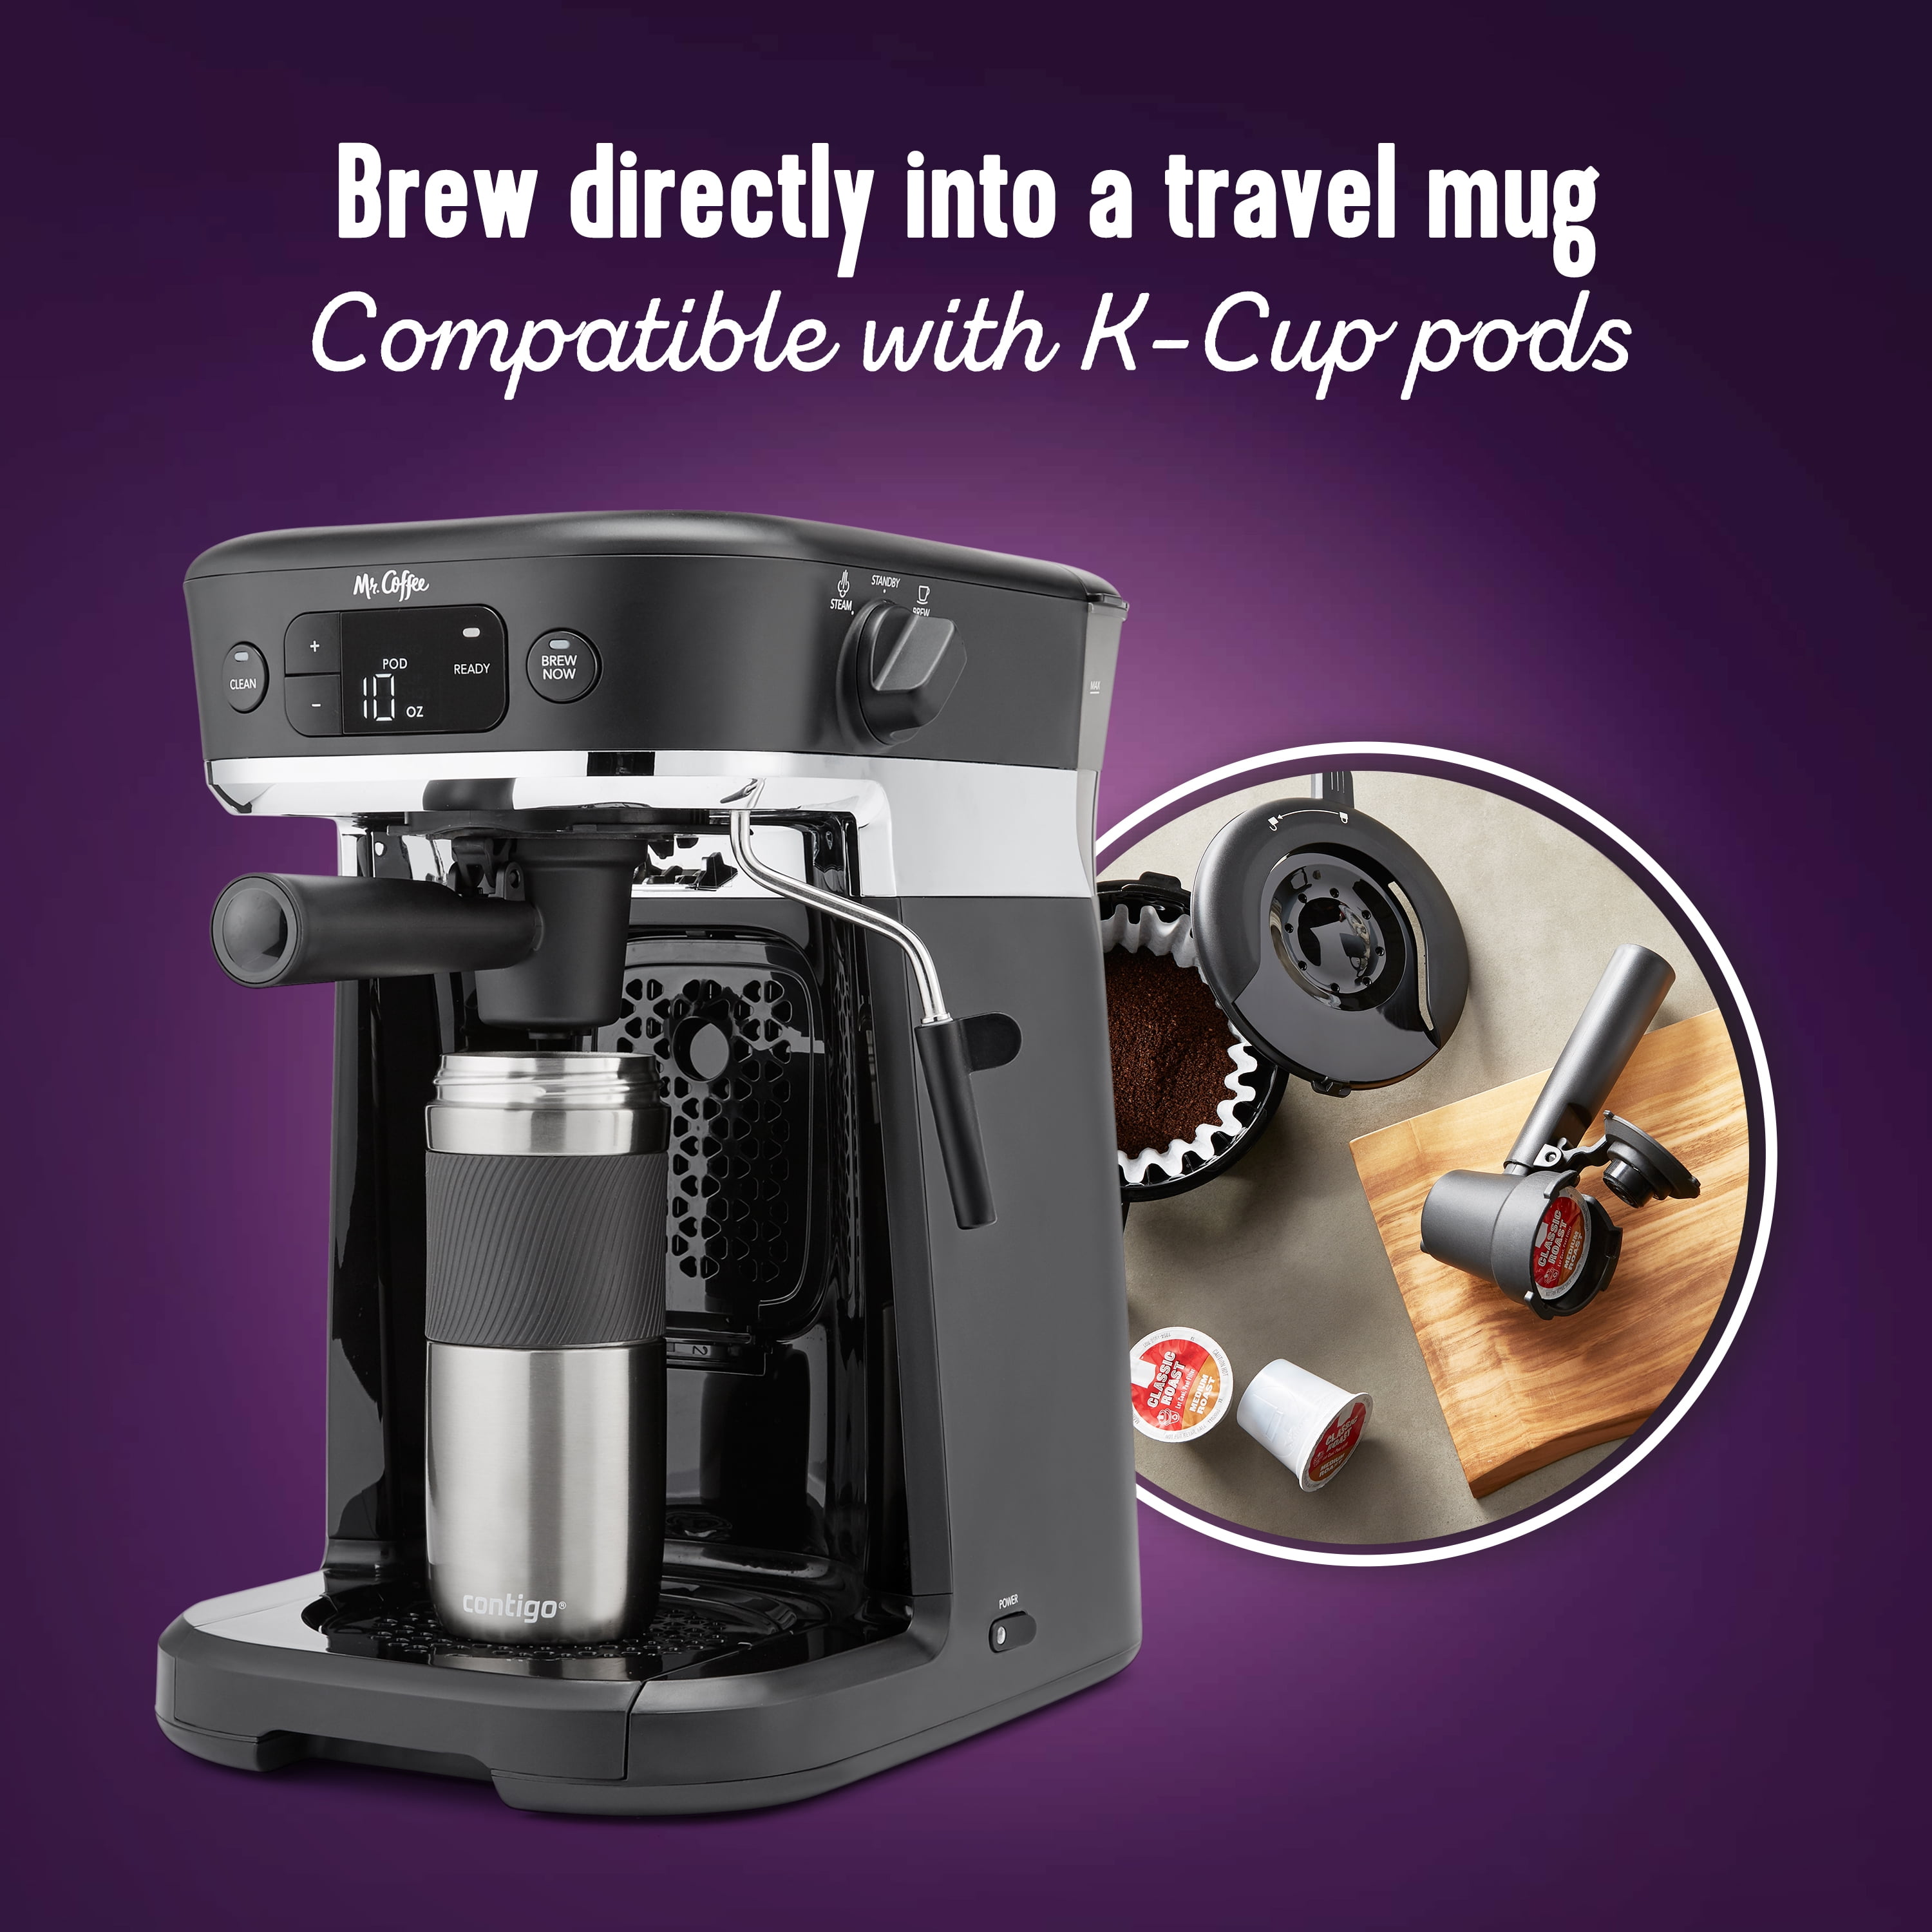 Up To 17% Off on Mr. Coffee Tea Cafe 2-in-1 Bl